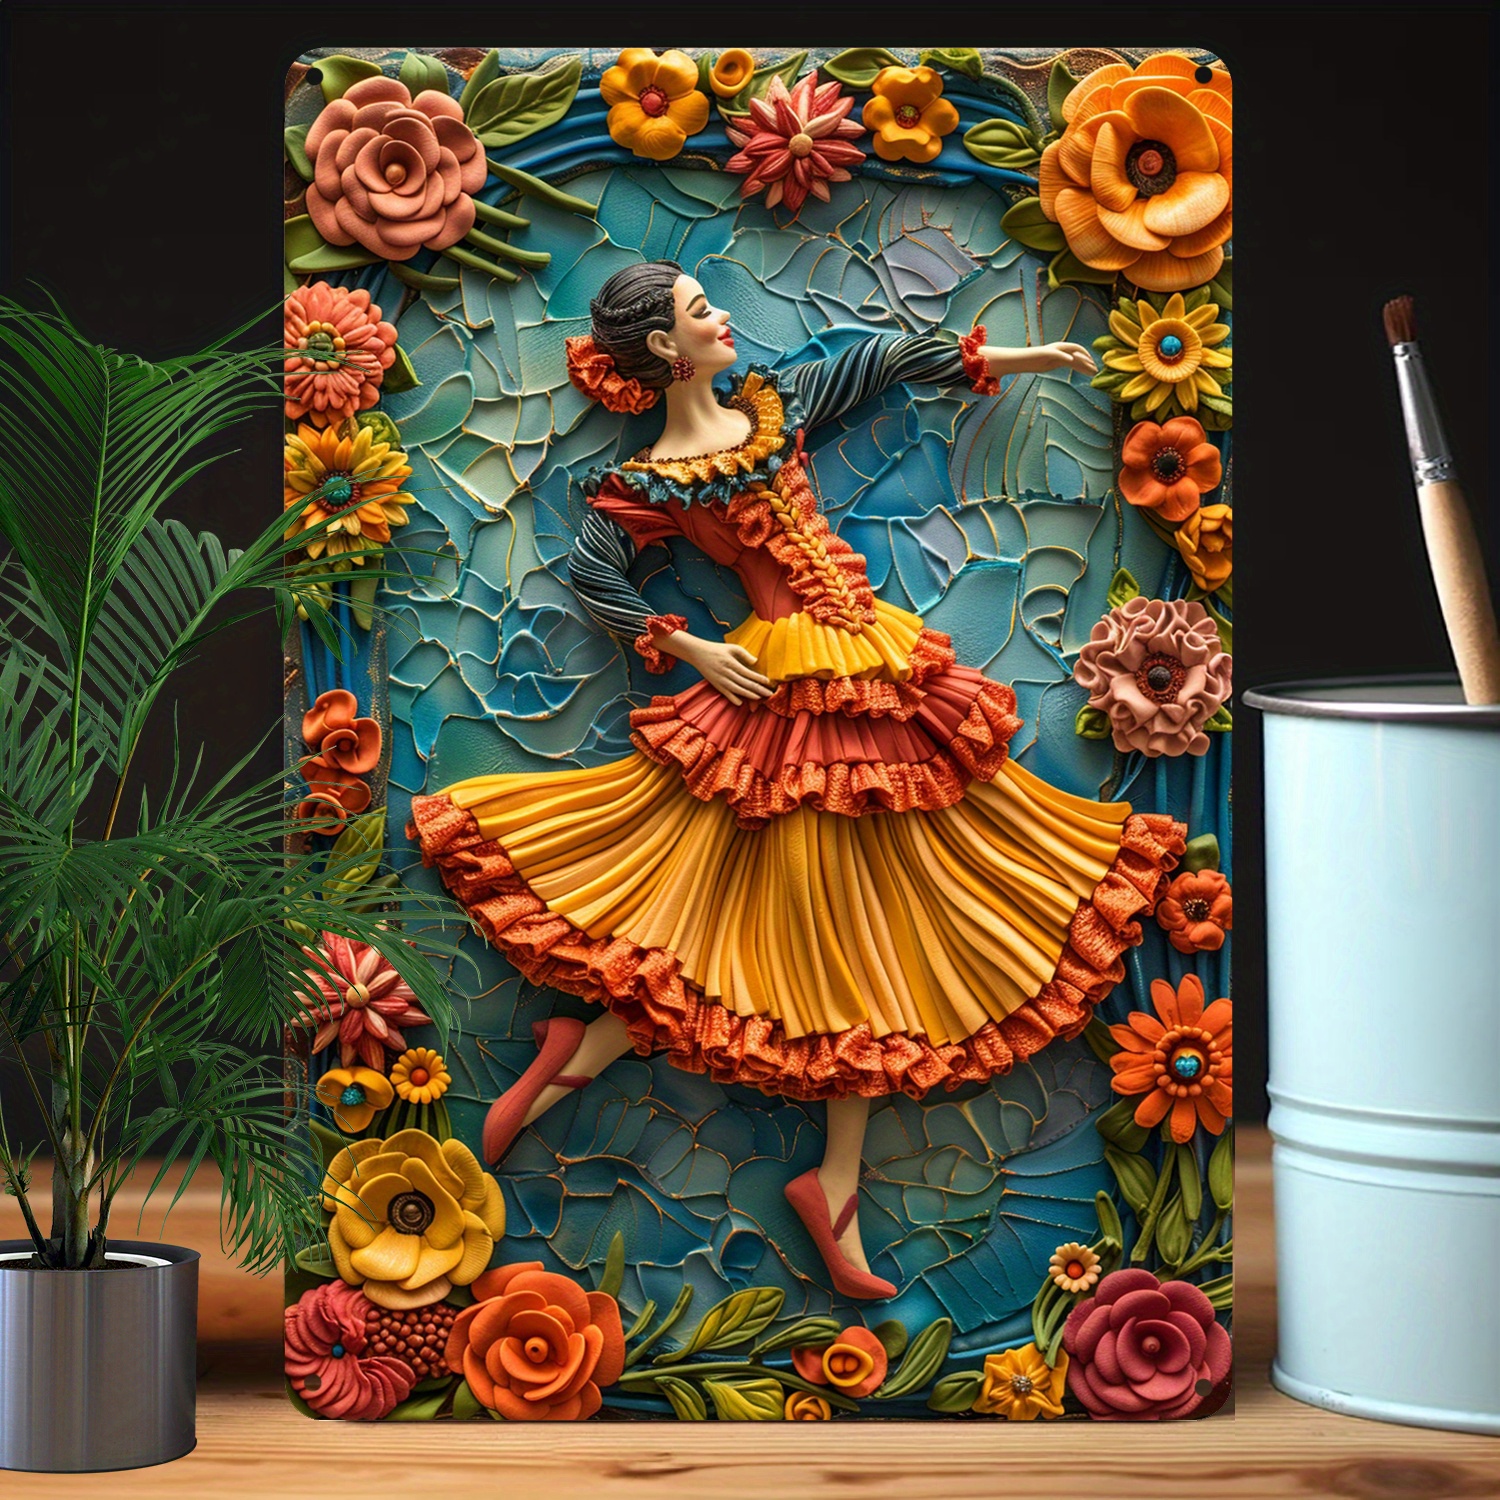 

Flamenco Dance Of Spain Theme Aluminum Metal Wall Art, 1pc 8x12 Inch Vintage Style Decorative Tin Sign, High Durability Moisture Resistant, Ideal For Home, Office, And Store Decoration A3262